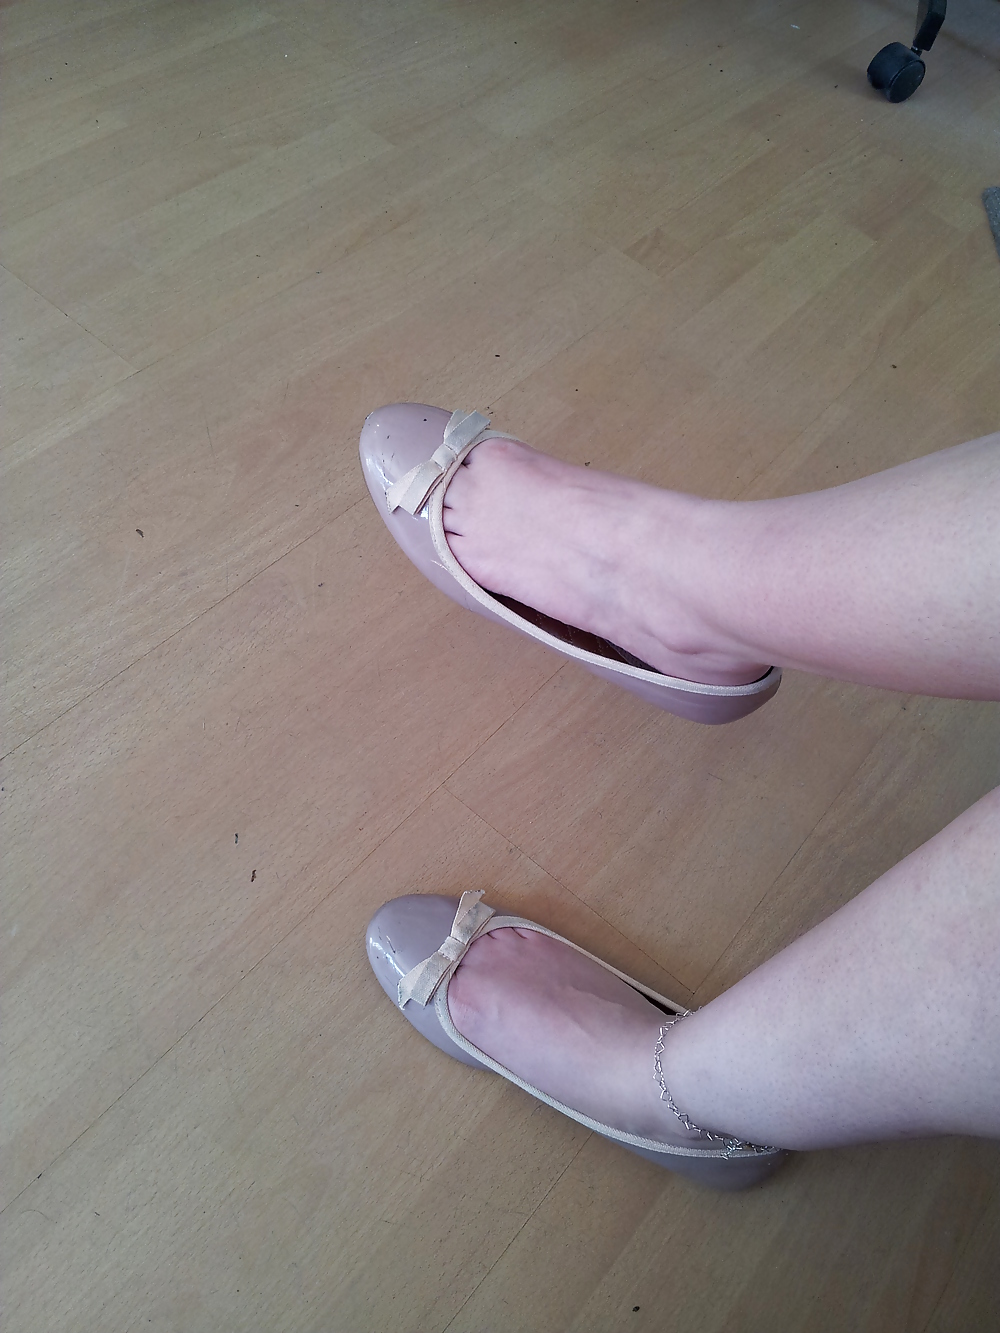 Wifes well worn nude lack Ballerinas flats shoes3 #19059018